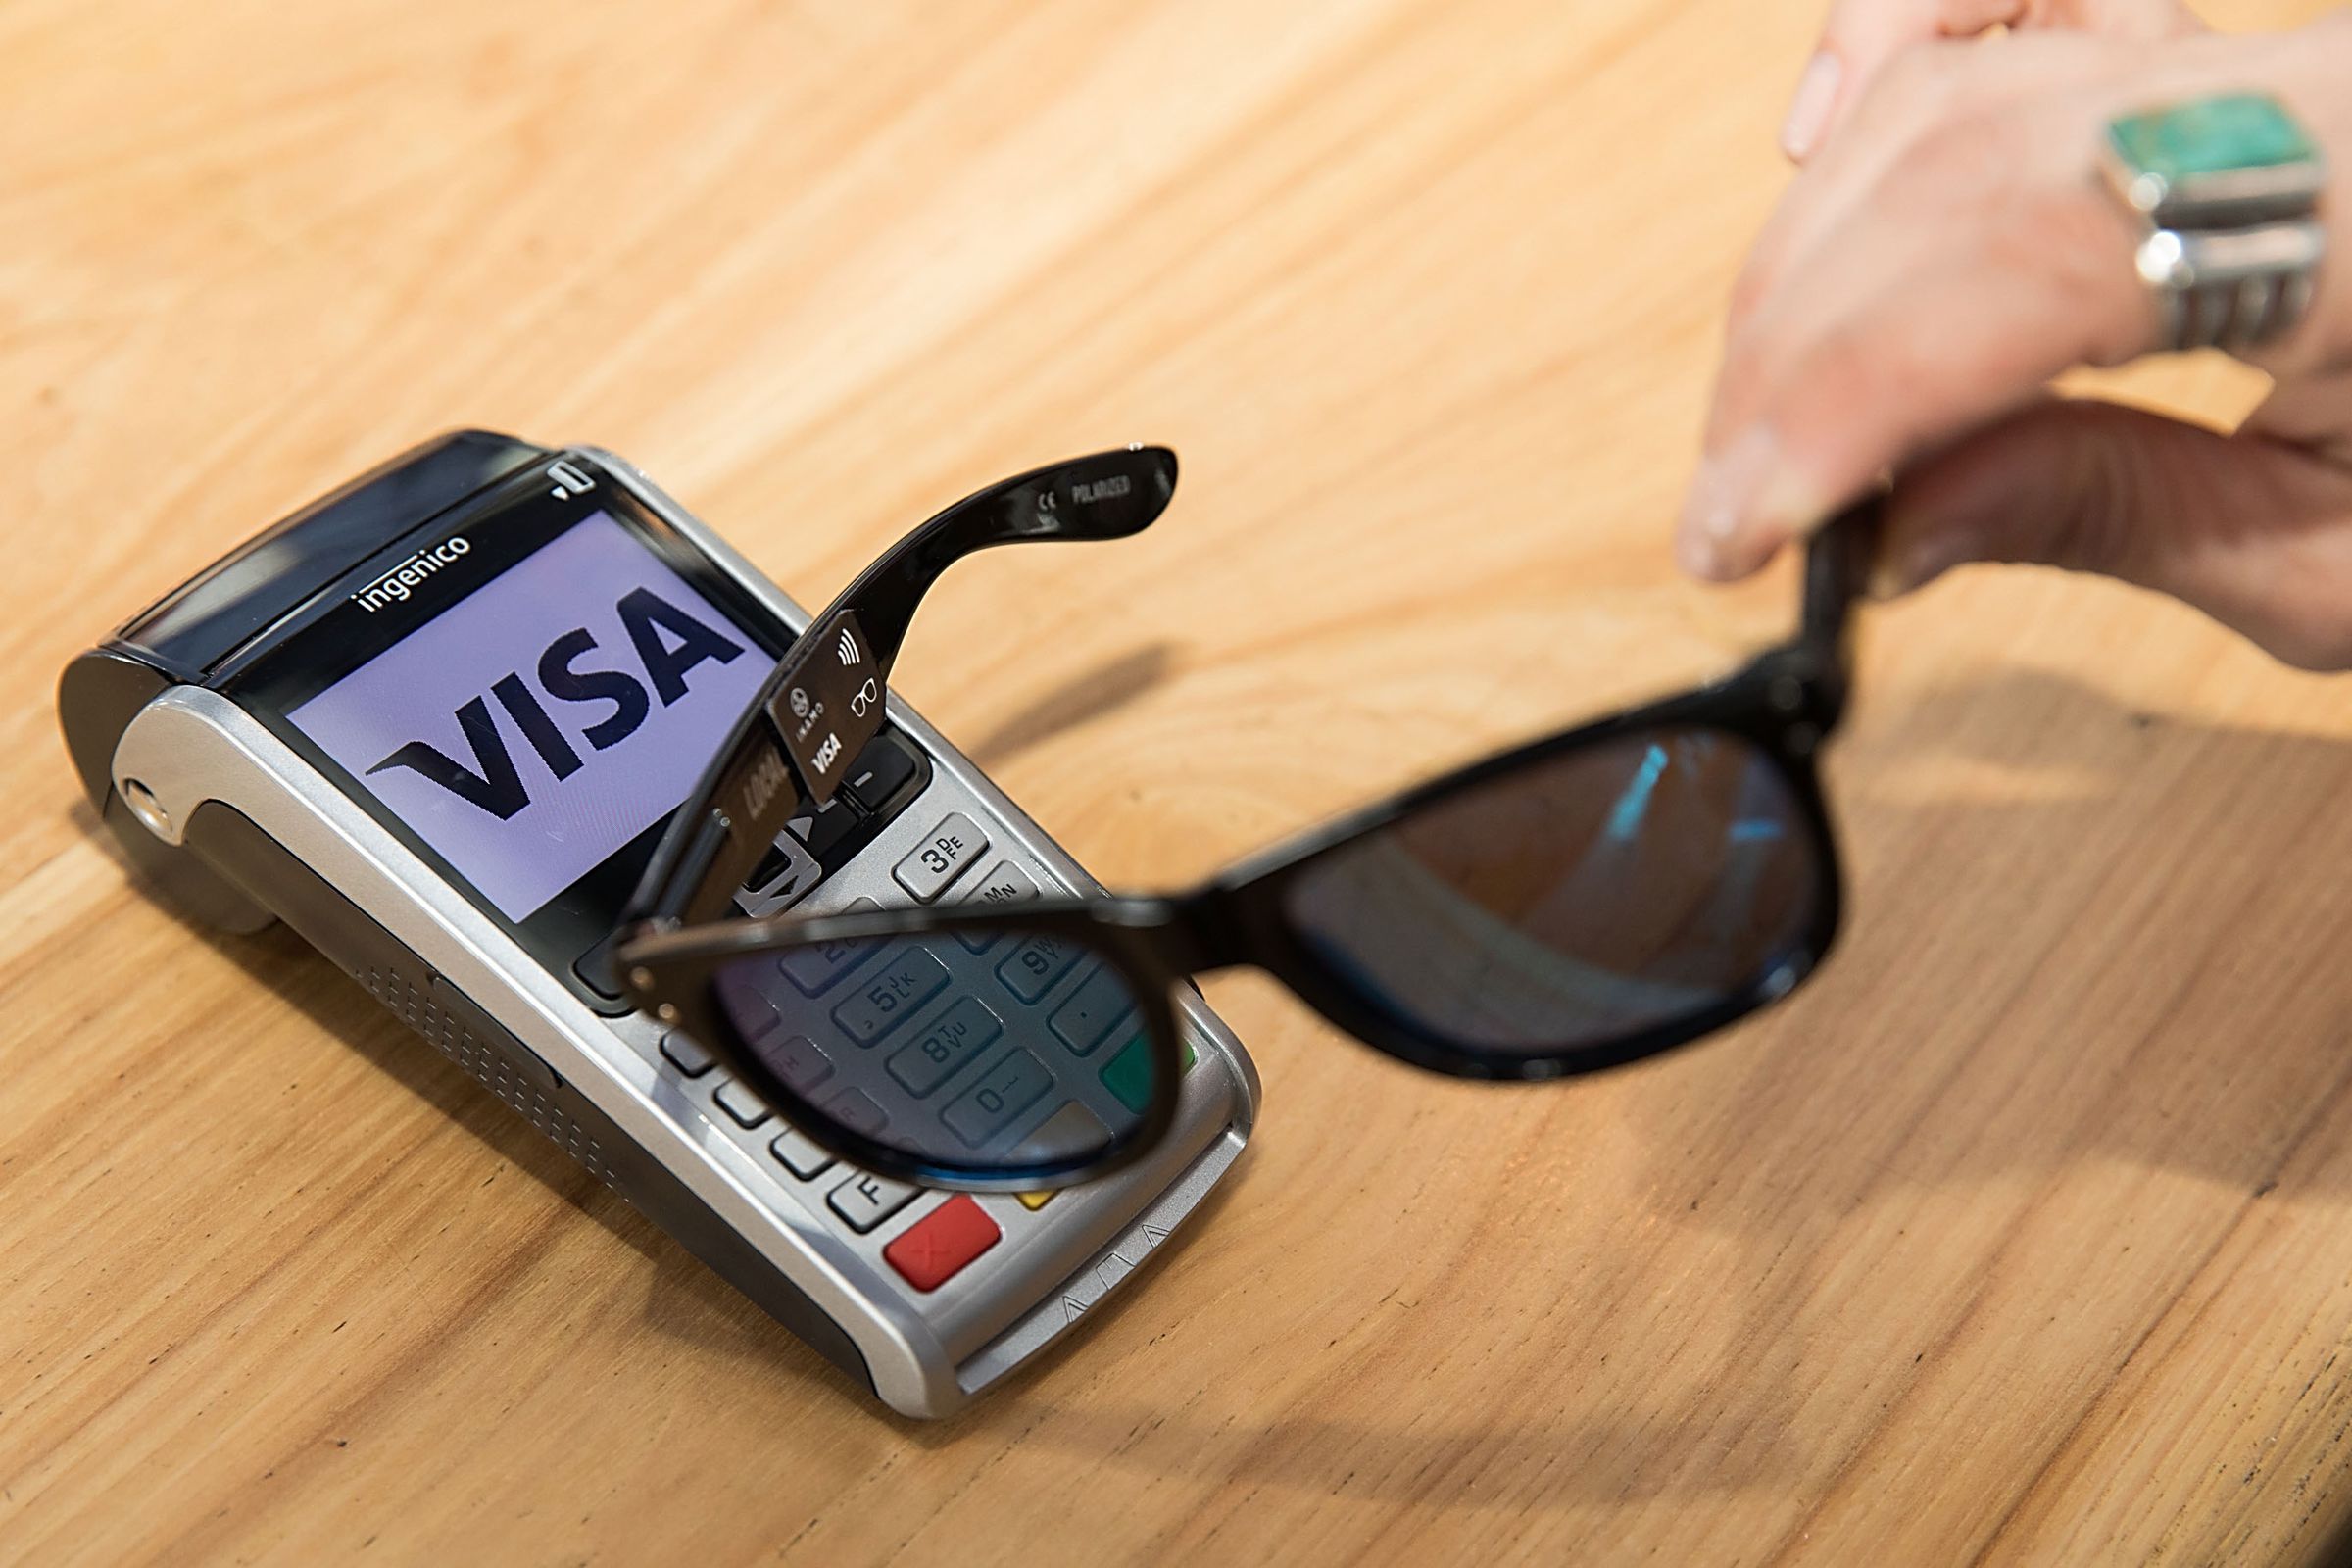 Visa unveils prototype of contactless payment sunglasses from the Everywhere Lounge on March 13, 2017 in Austin, Texas. (Photo by Rick Kern/WME IMG/Getty Images for VISA)